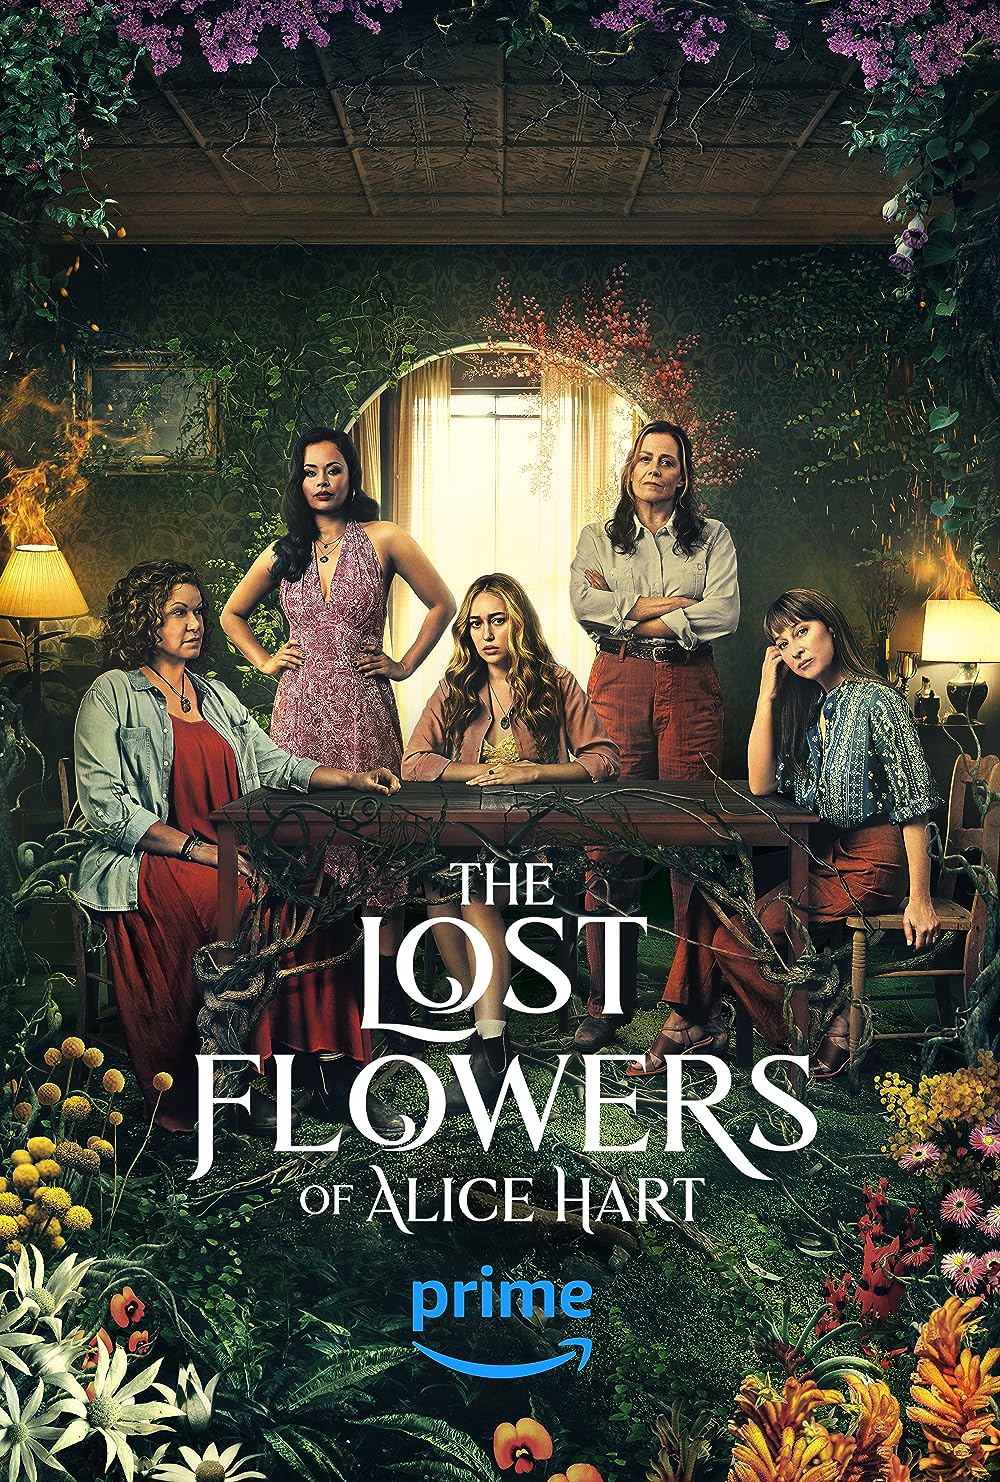 The Lost Flowers of Alice Hart (Prime Video):  Embark on an emotional journey with 'The Lost Flowers of Alice Hart', now available for streaming on Prime Video. 